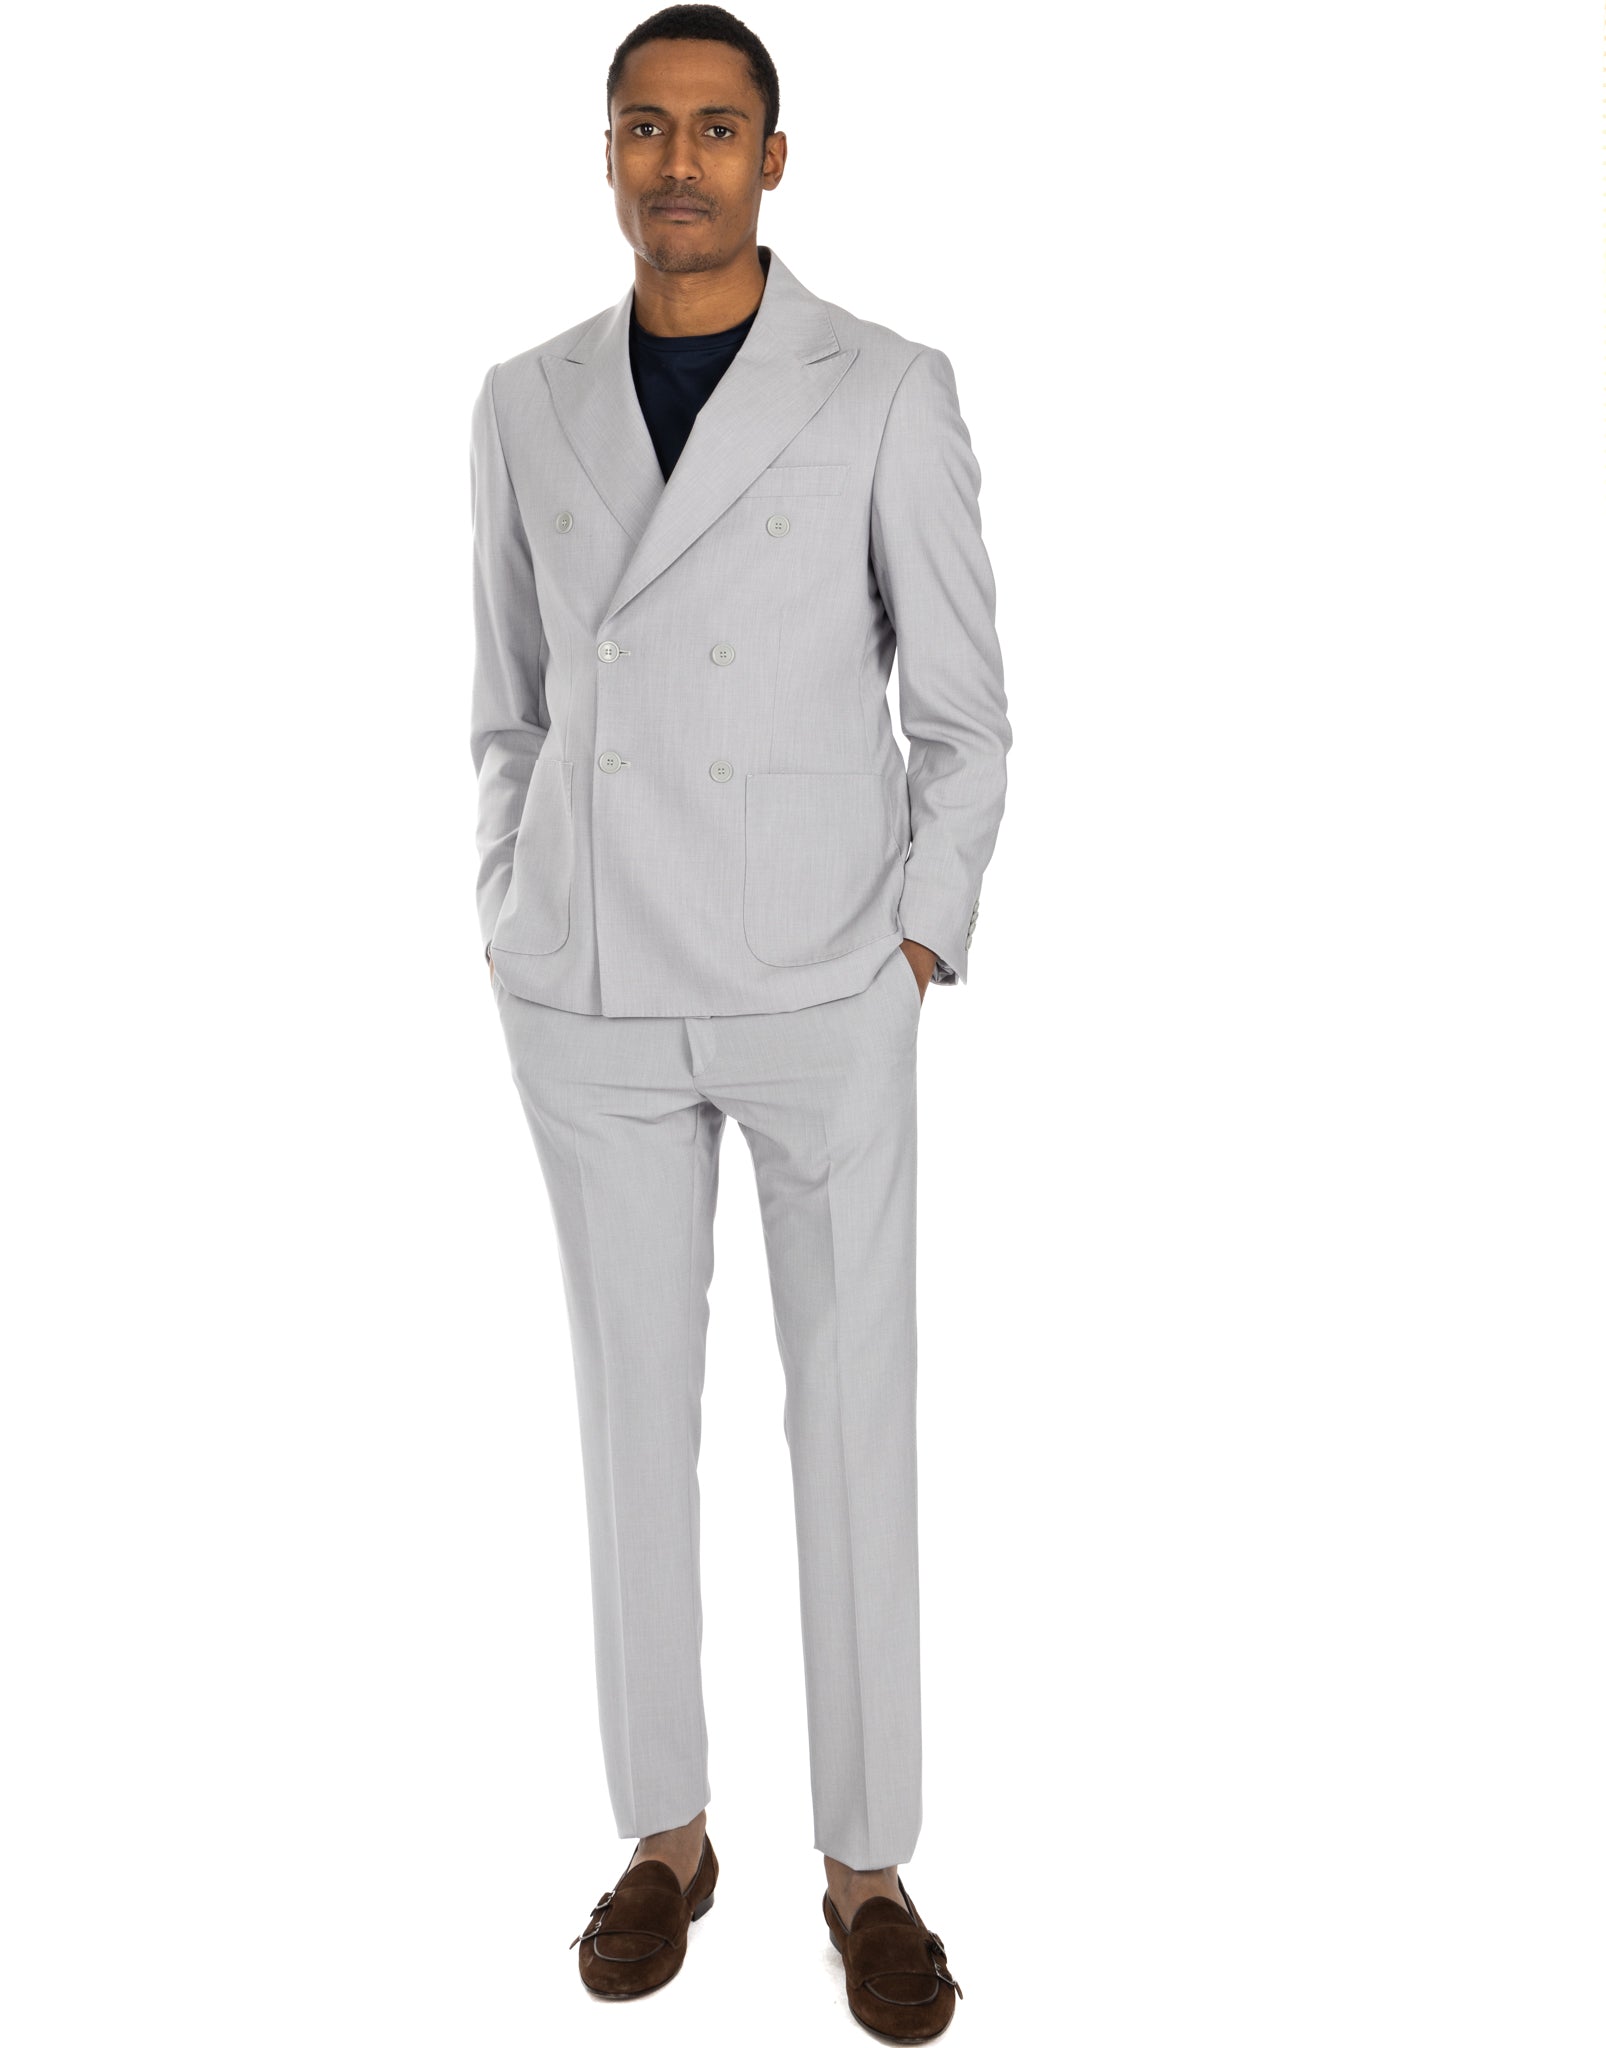 Monaco - gray double-breasted suit